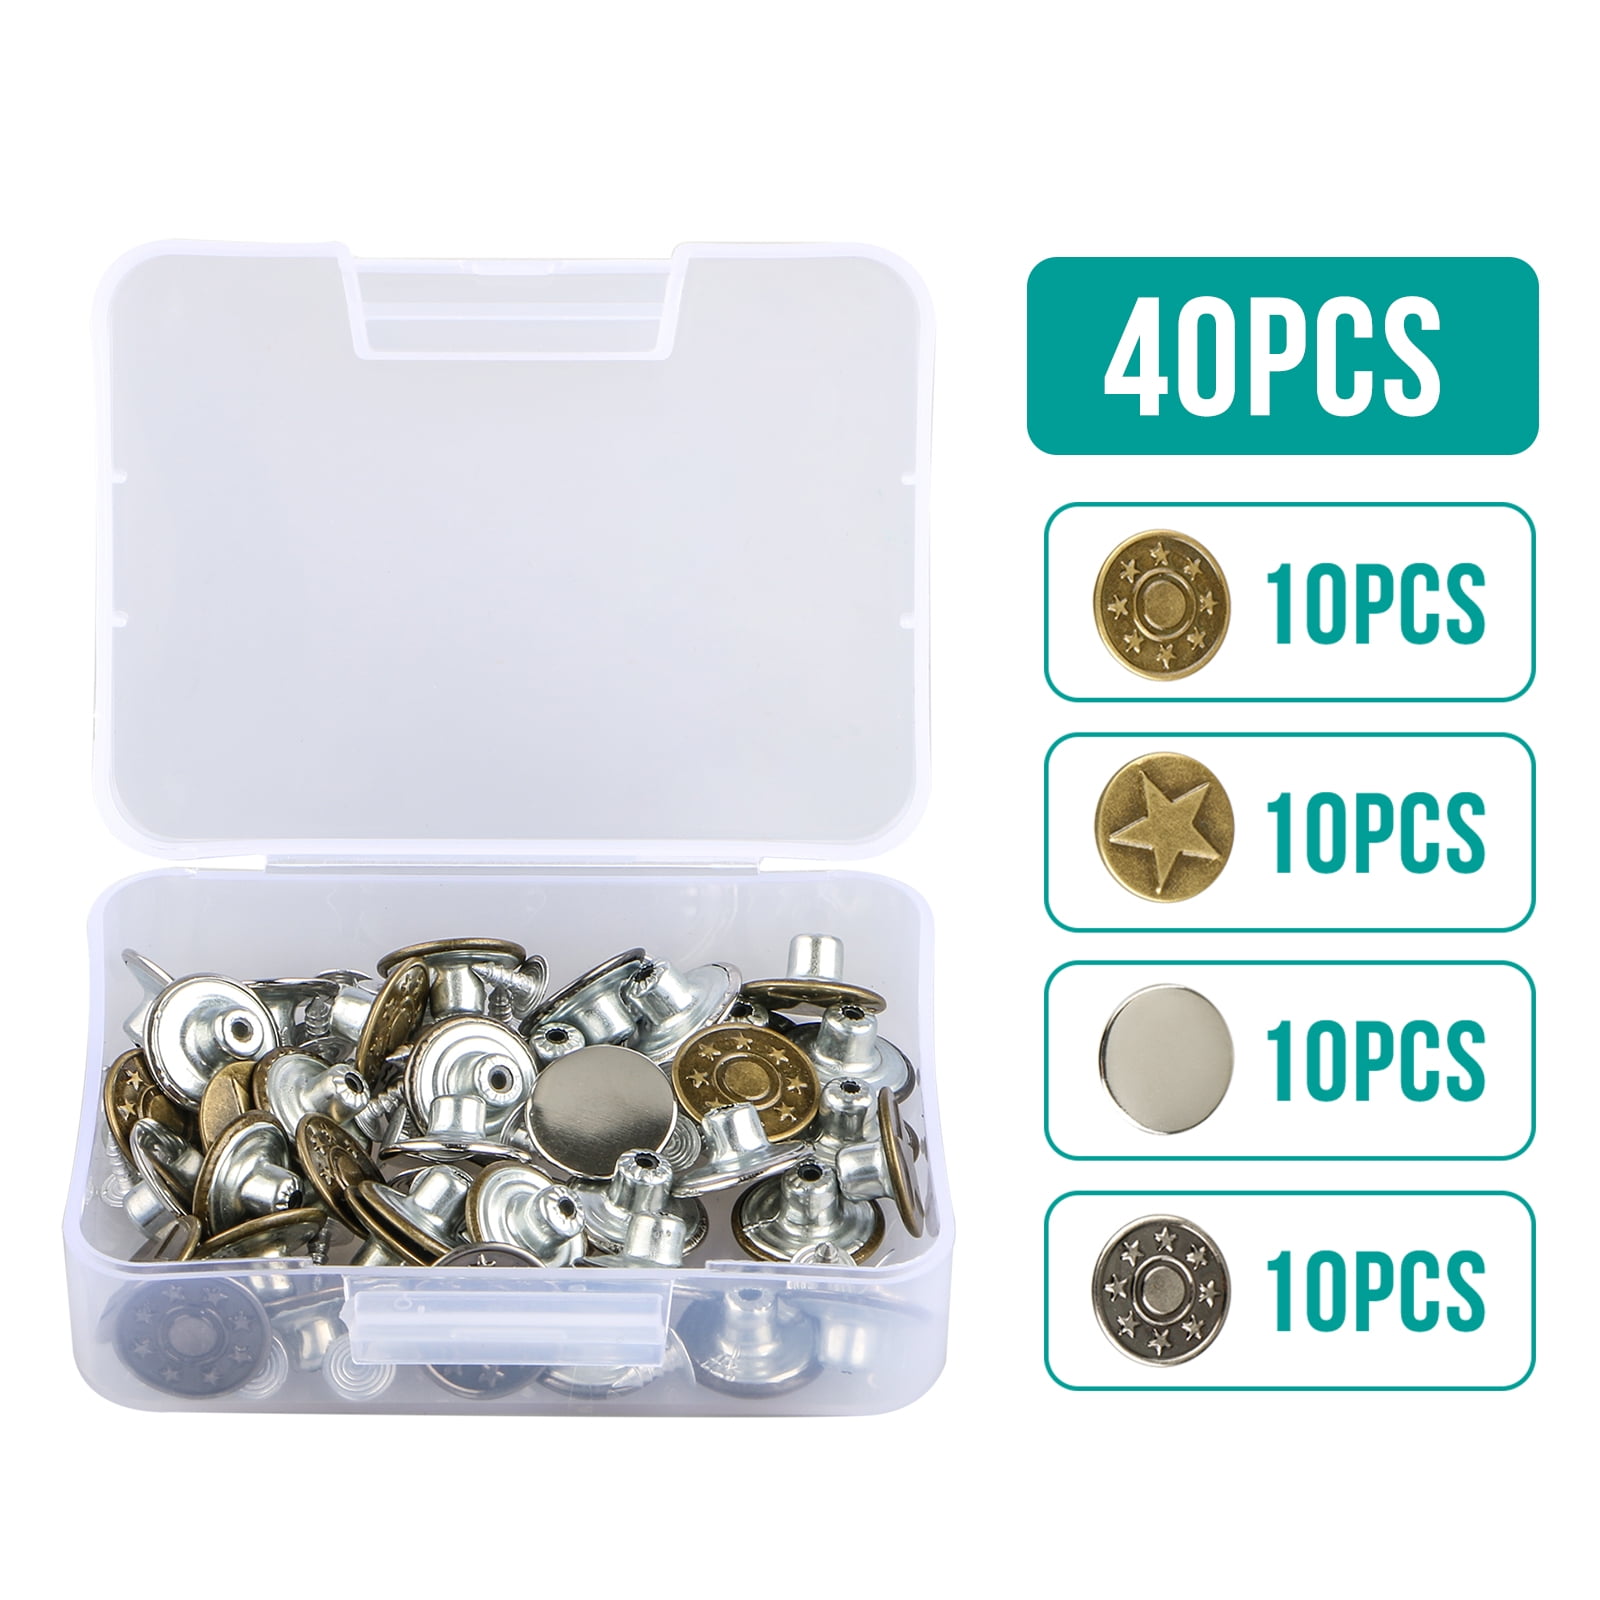 40 Sets Jeans Metal Tack Snap Buttons Replacement Repair Sewing Pants w/Box 17mm 